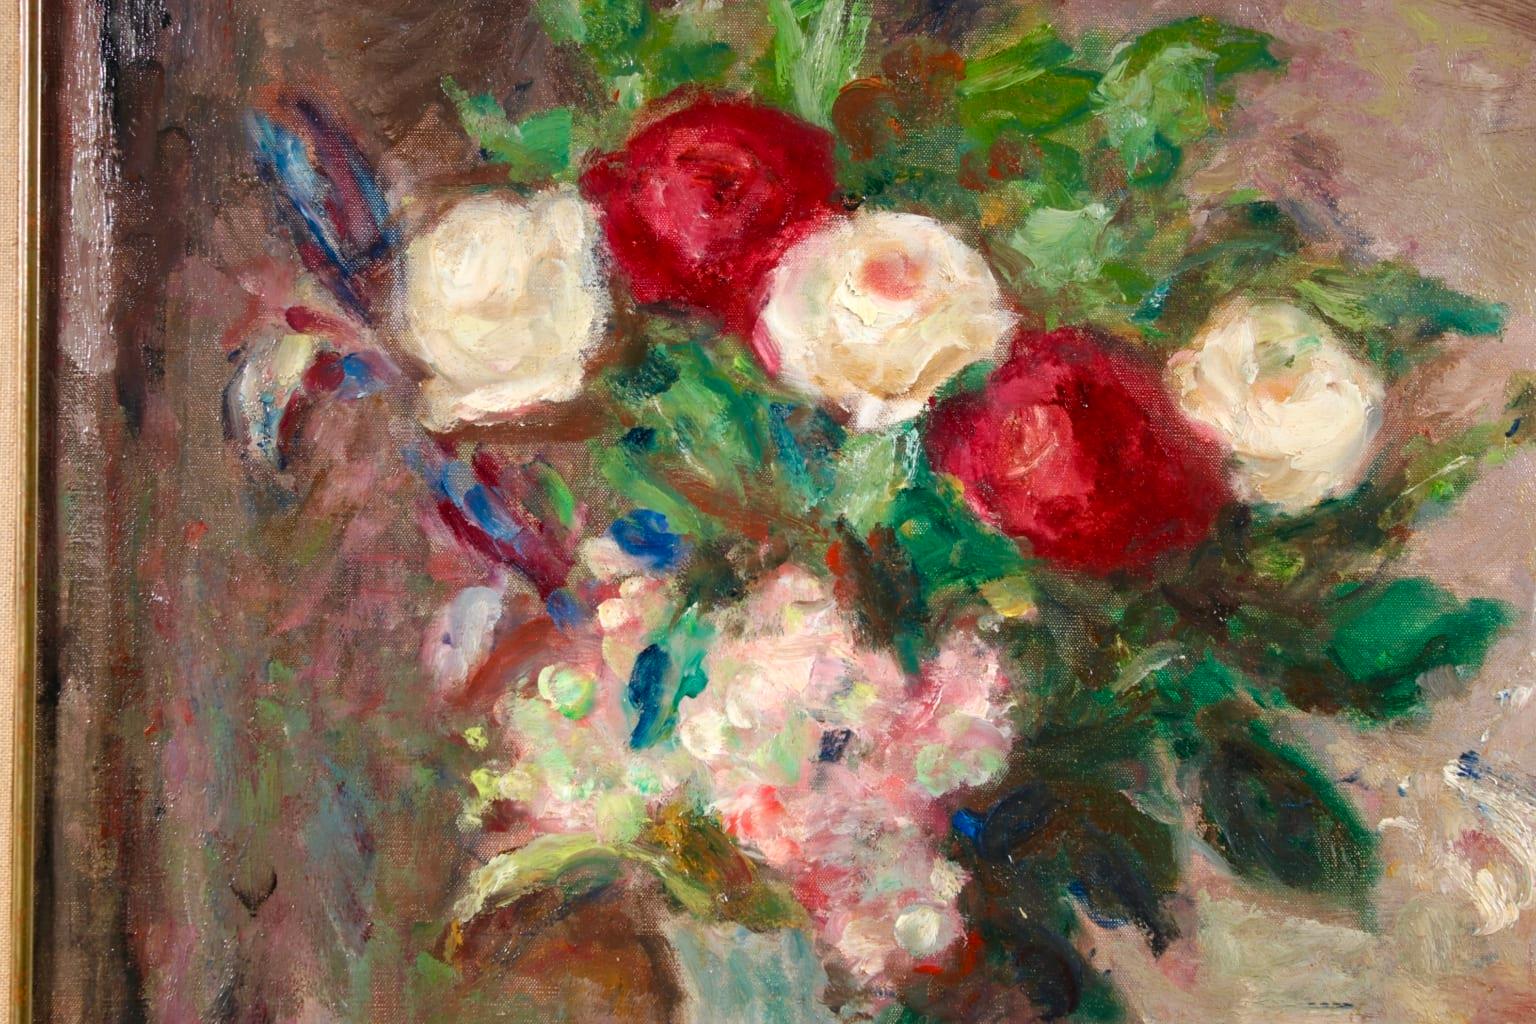 A wonderful still life oil on original canvas by French post impressionist painter Georges D'Espagnat depicting red and white roses in a jug vase placed on a blue tablecloth and with books beside it. 

Signature:
Signed upper